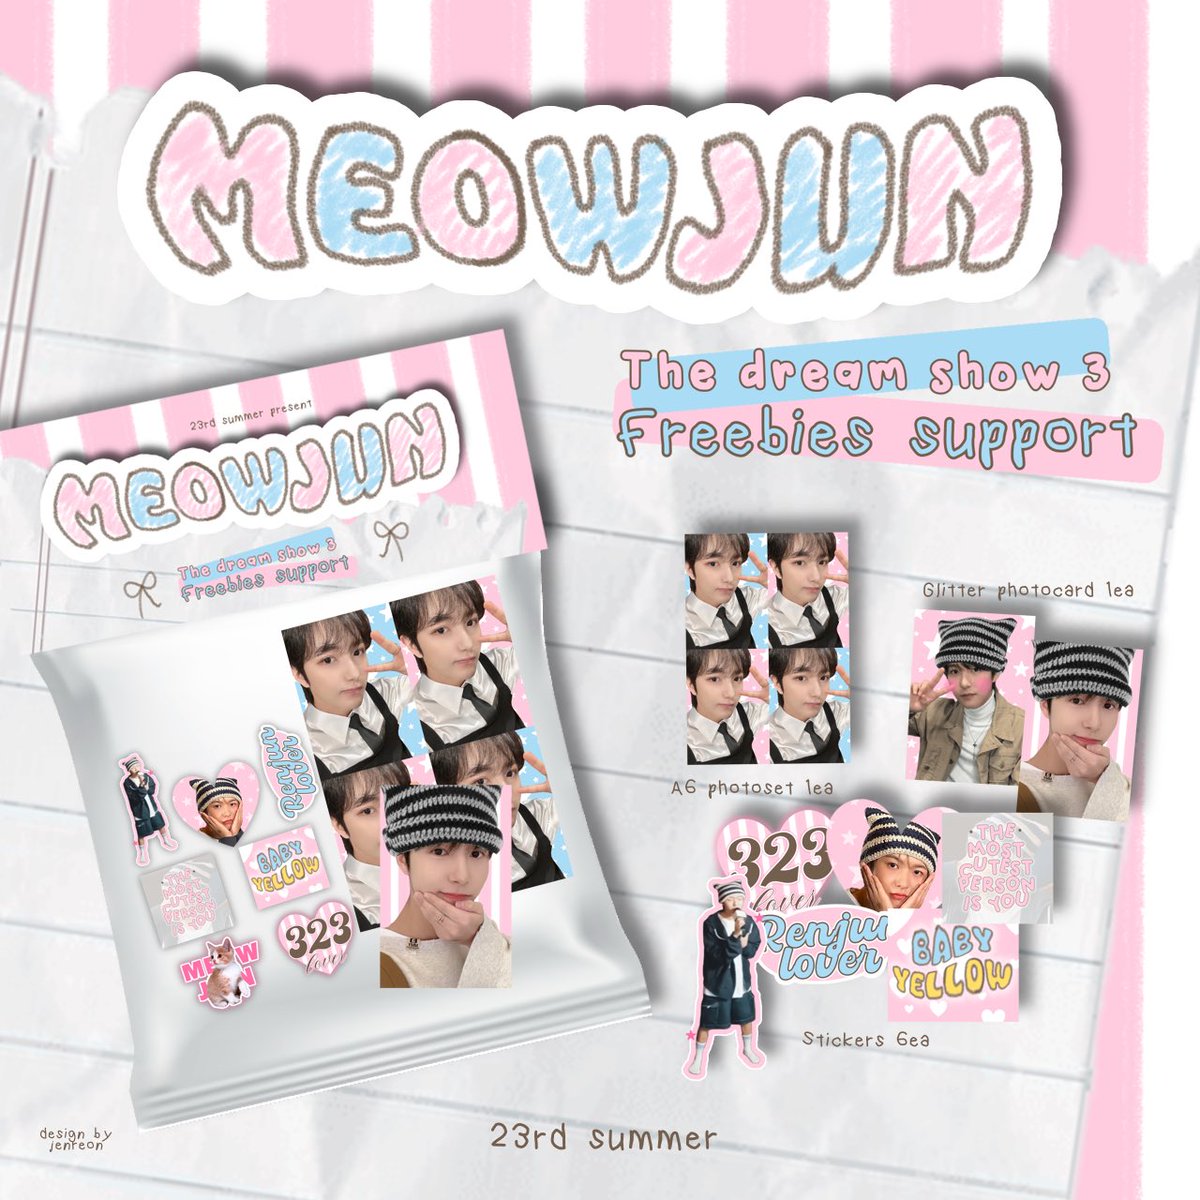 ˖  freebies the dream show 3 in Jakarta   𓈒 * ﹆  
by @23summer_ 

meowjun and puppyjen 🐈🦴🐶

🗓️ 18/5
🏟️GBK
🕰️ tba
꒰ limited qty, first come first get! ꒱

how to get:
please check on this thread ! 💙💛

#TDS3INJAKARTA #THEDREAMSHOW3_IN_JAKARTA #NCTDREAM